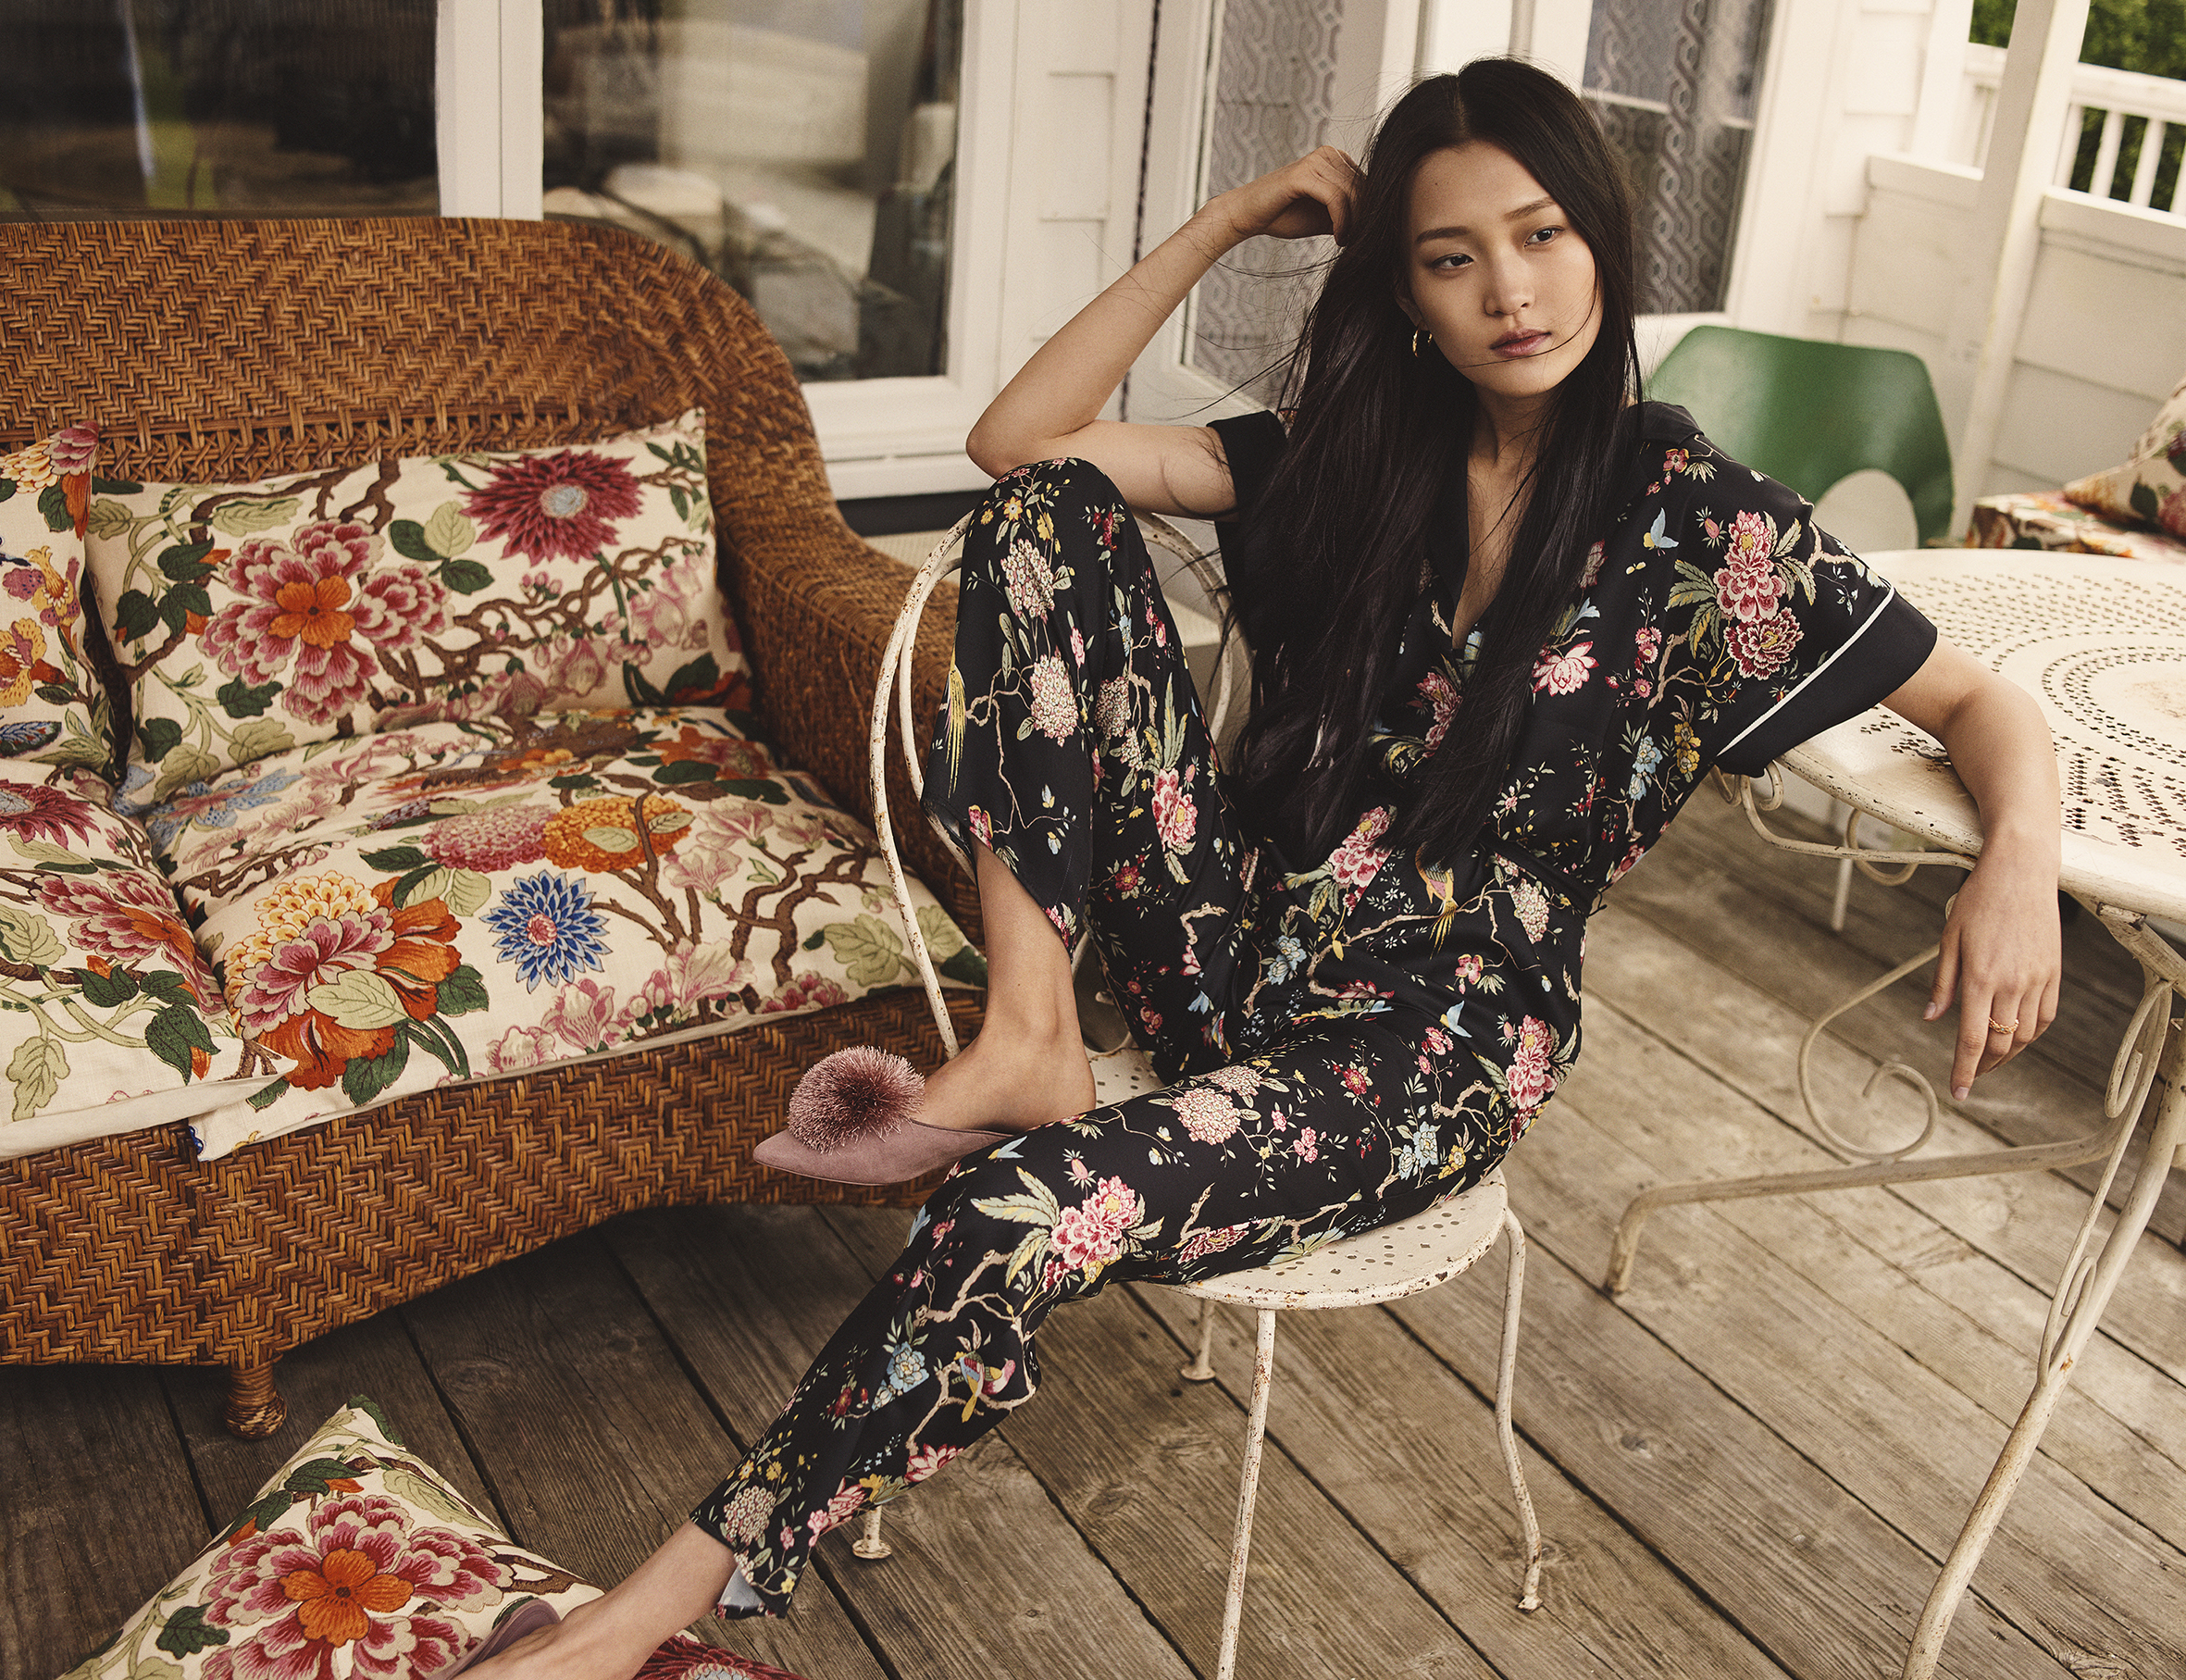 LIV for Interiors / GP & J Baker x H&M Collection